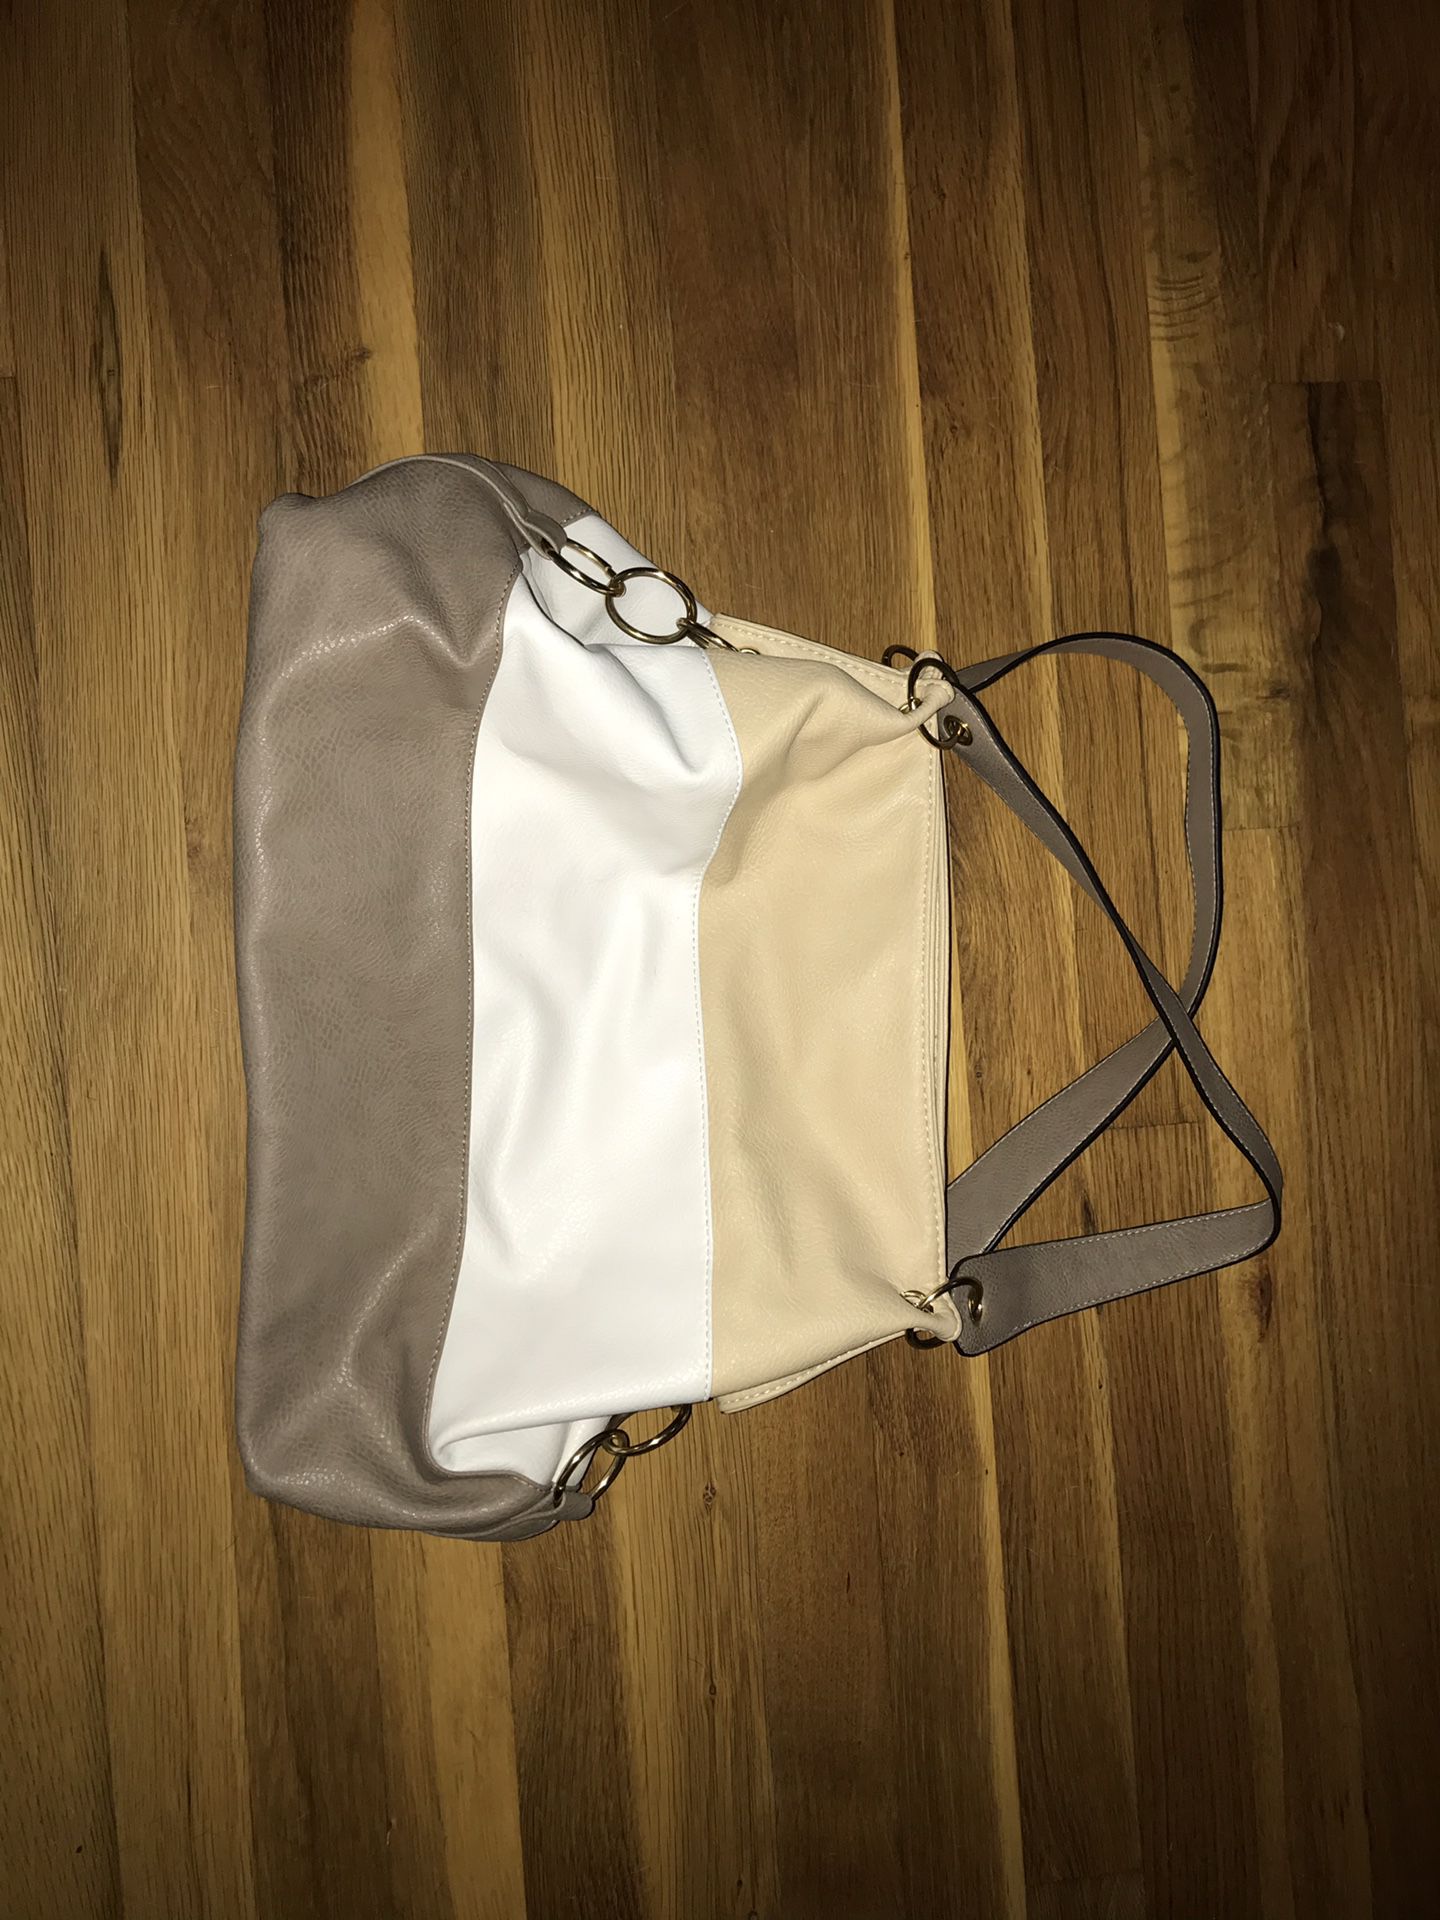 Tri colored Large Leather Bag, like new